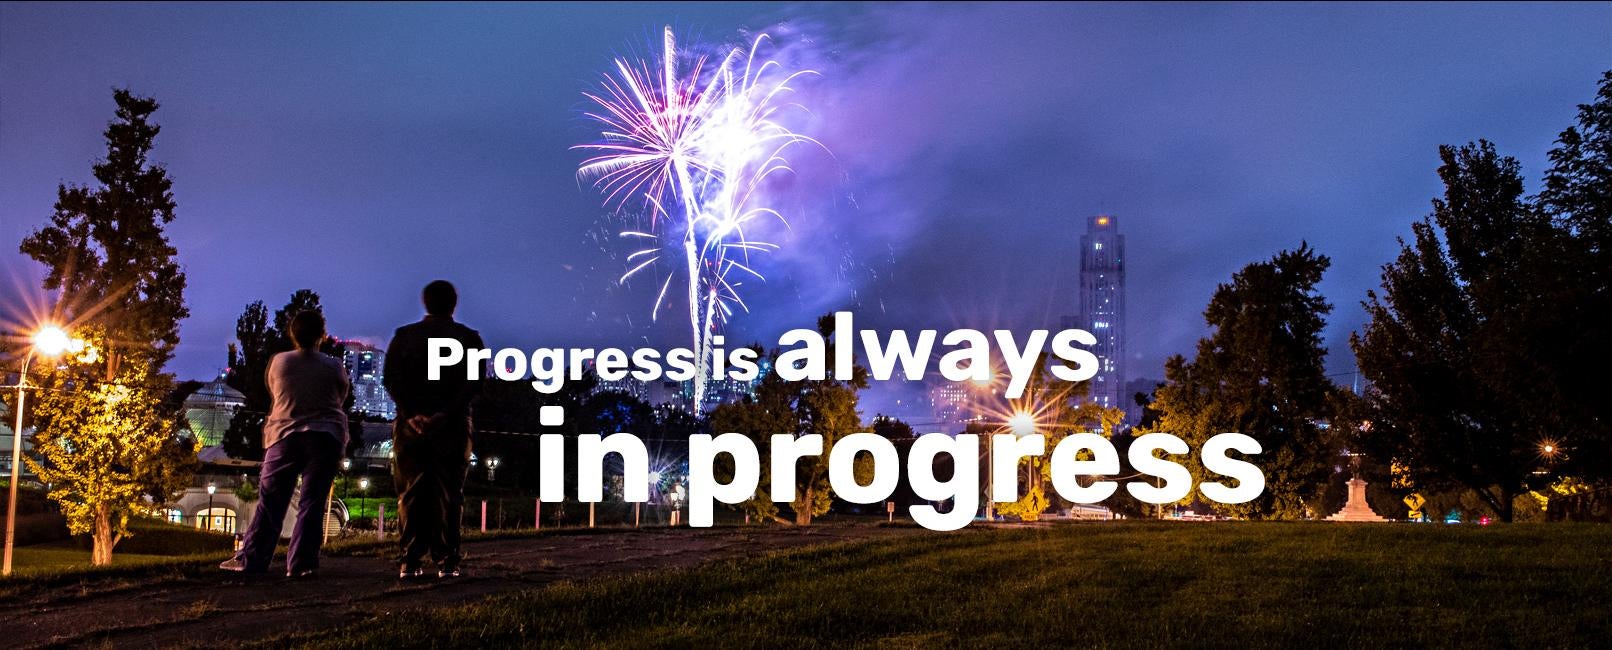 Fireworks with Cathedral in background: Progress is always in progress text over image